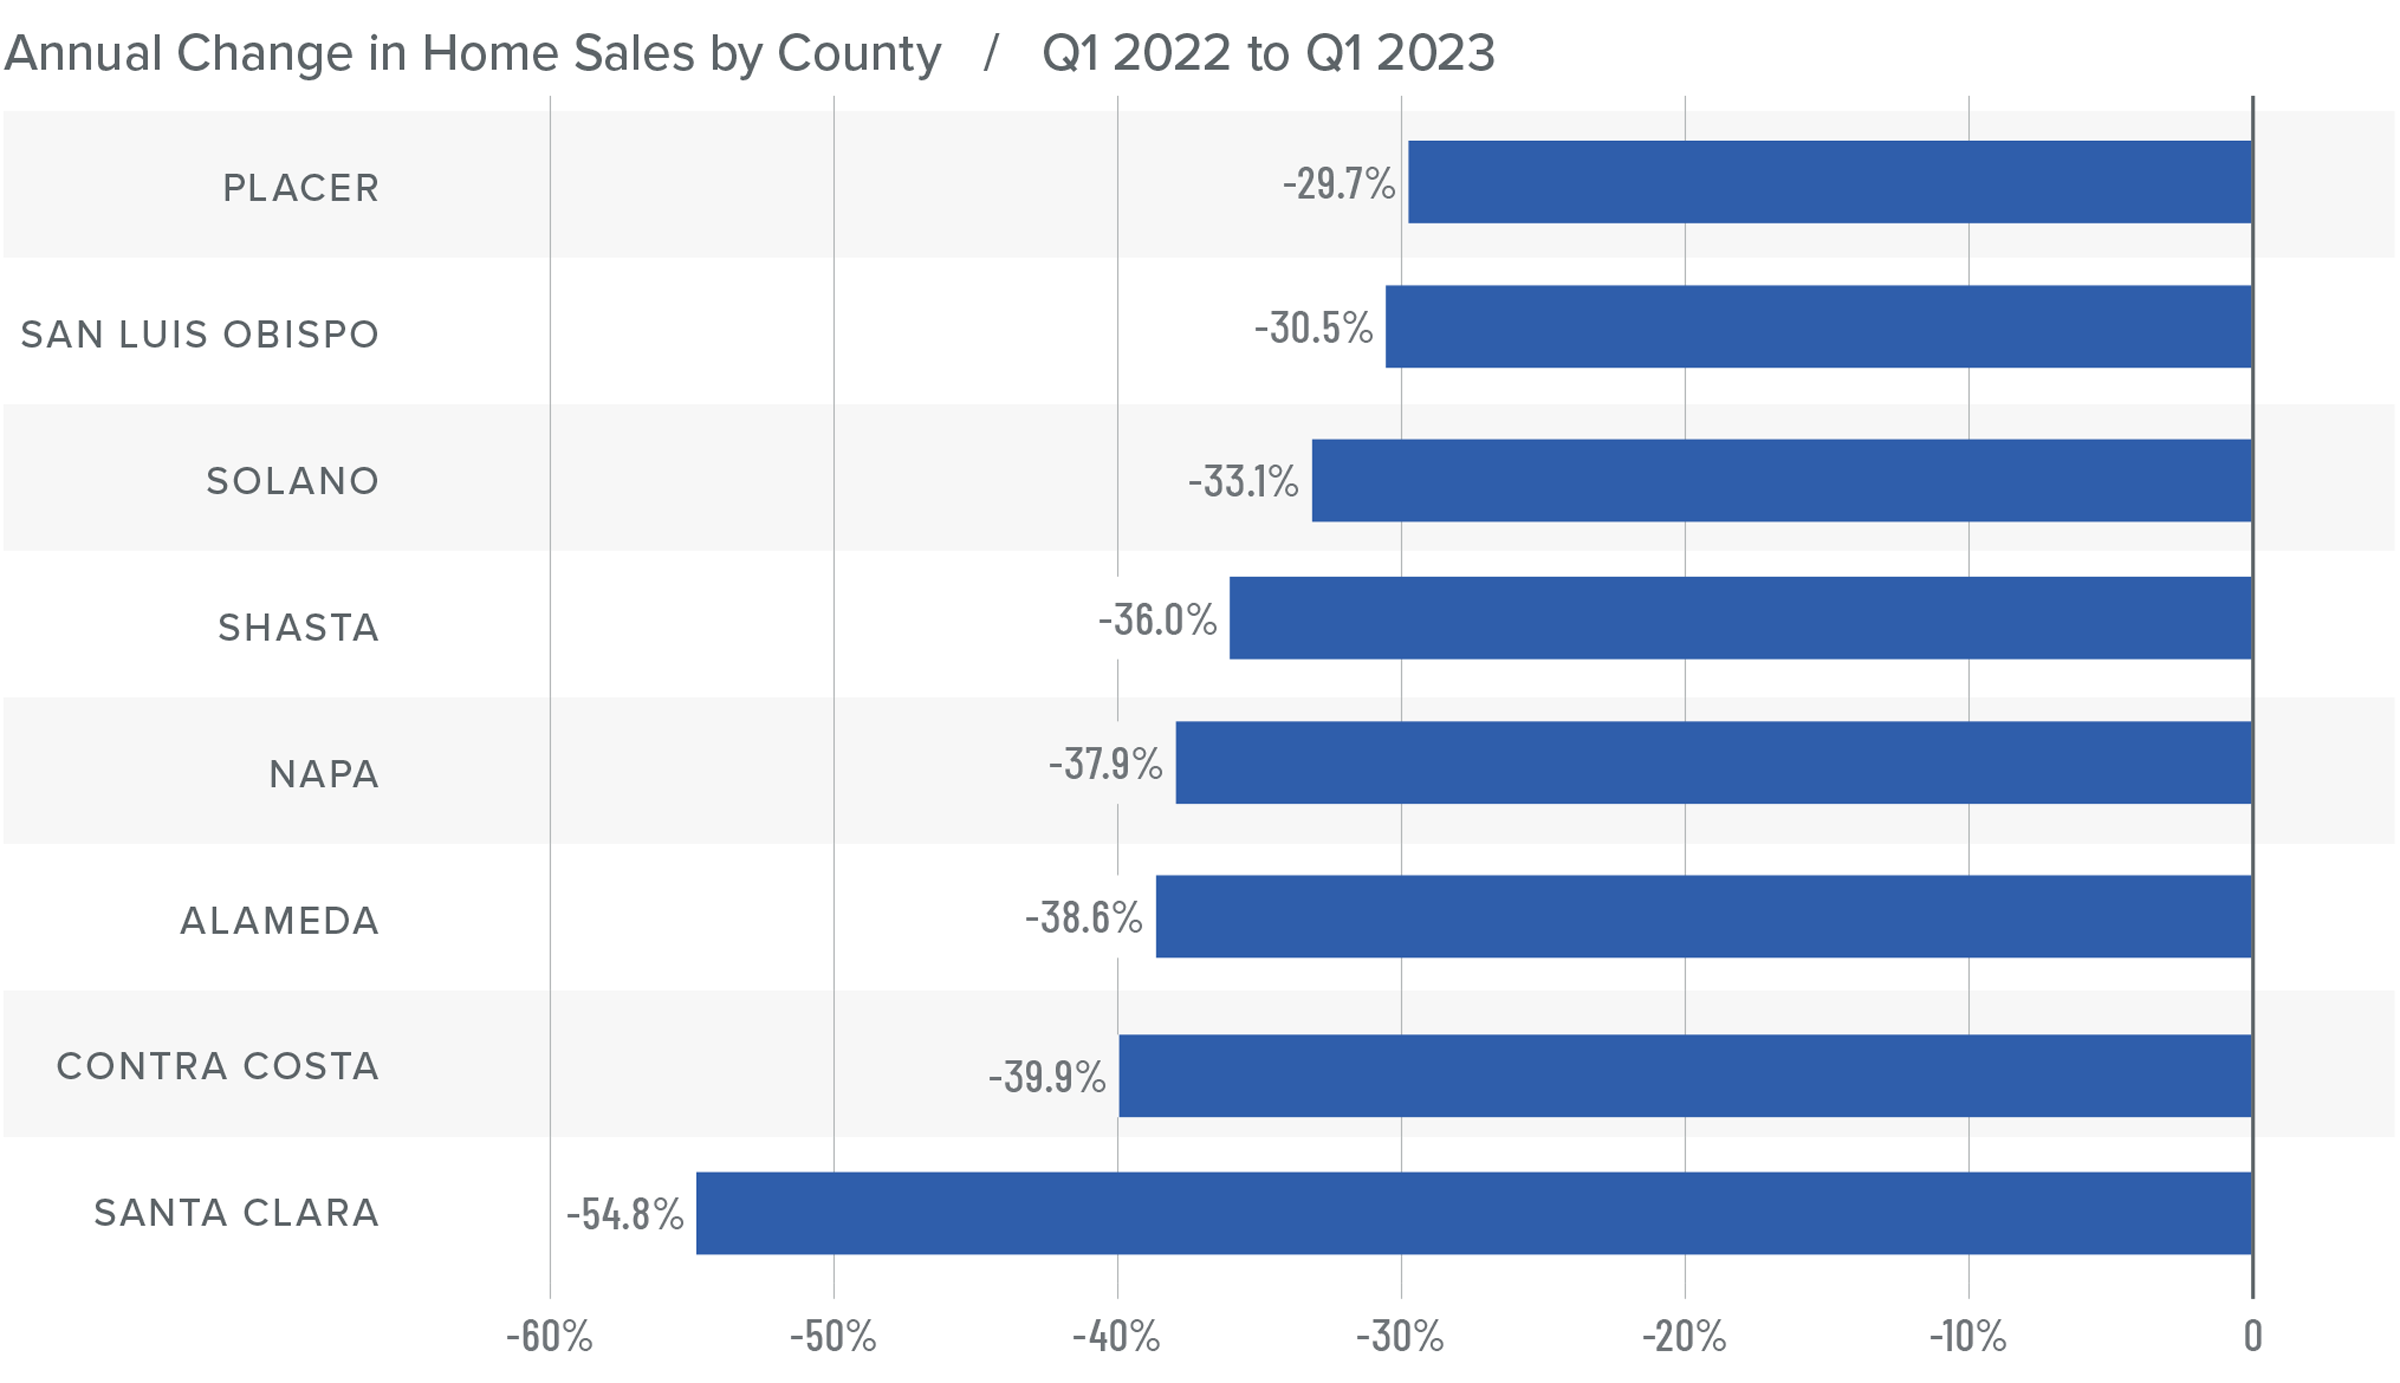 A bar graph showing the annual change in home sales for various counties in Northern California from Q1 2022 to Q1 2023. All counties have a negative percentage year-over-year change. Here are the totals: Placer at -29.7%, San Luis Obispo at -30.5%, Solano -33.1%, Shasta -36%, Napa -37.9%, Alameda -38.6%, Contra Costa -39.9%, and Santa Clara -54.8%.